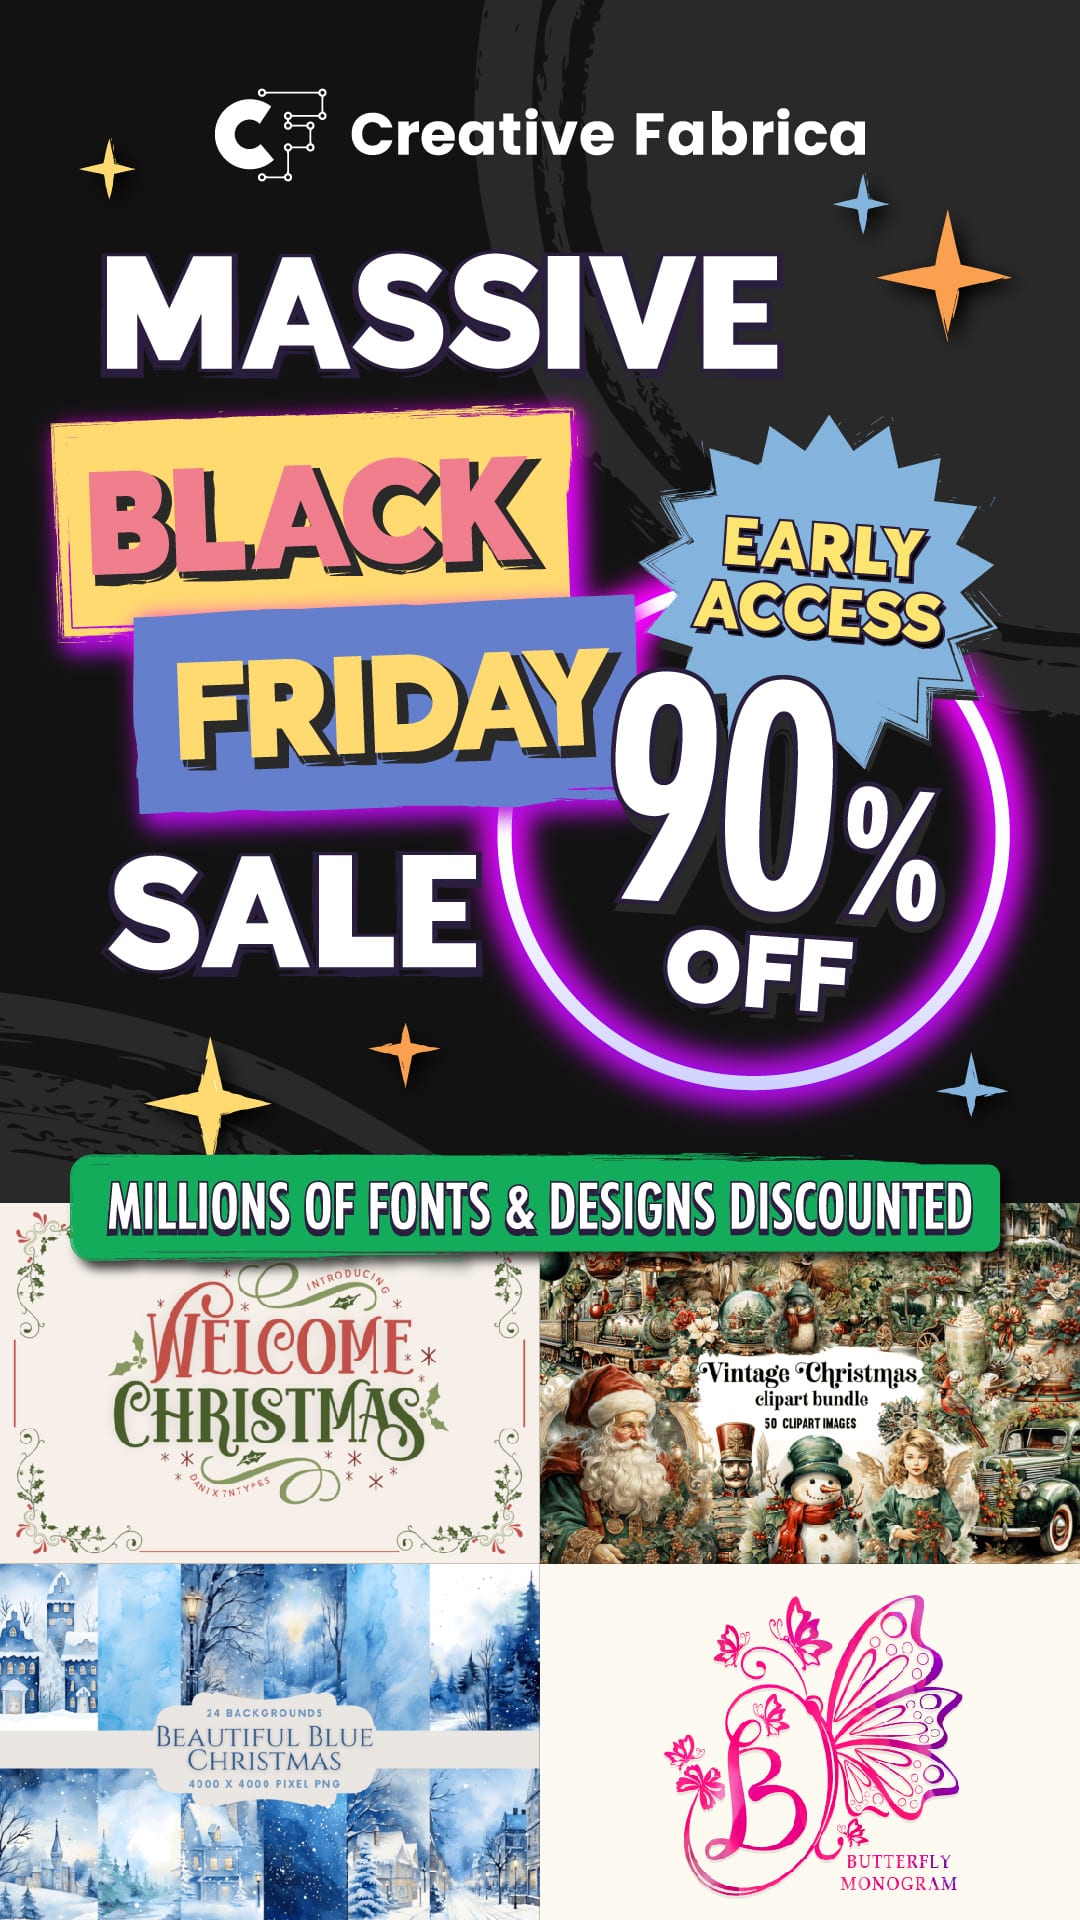 Black Friday - Early Access 90% Sale